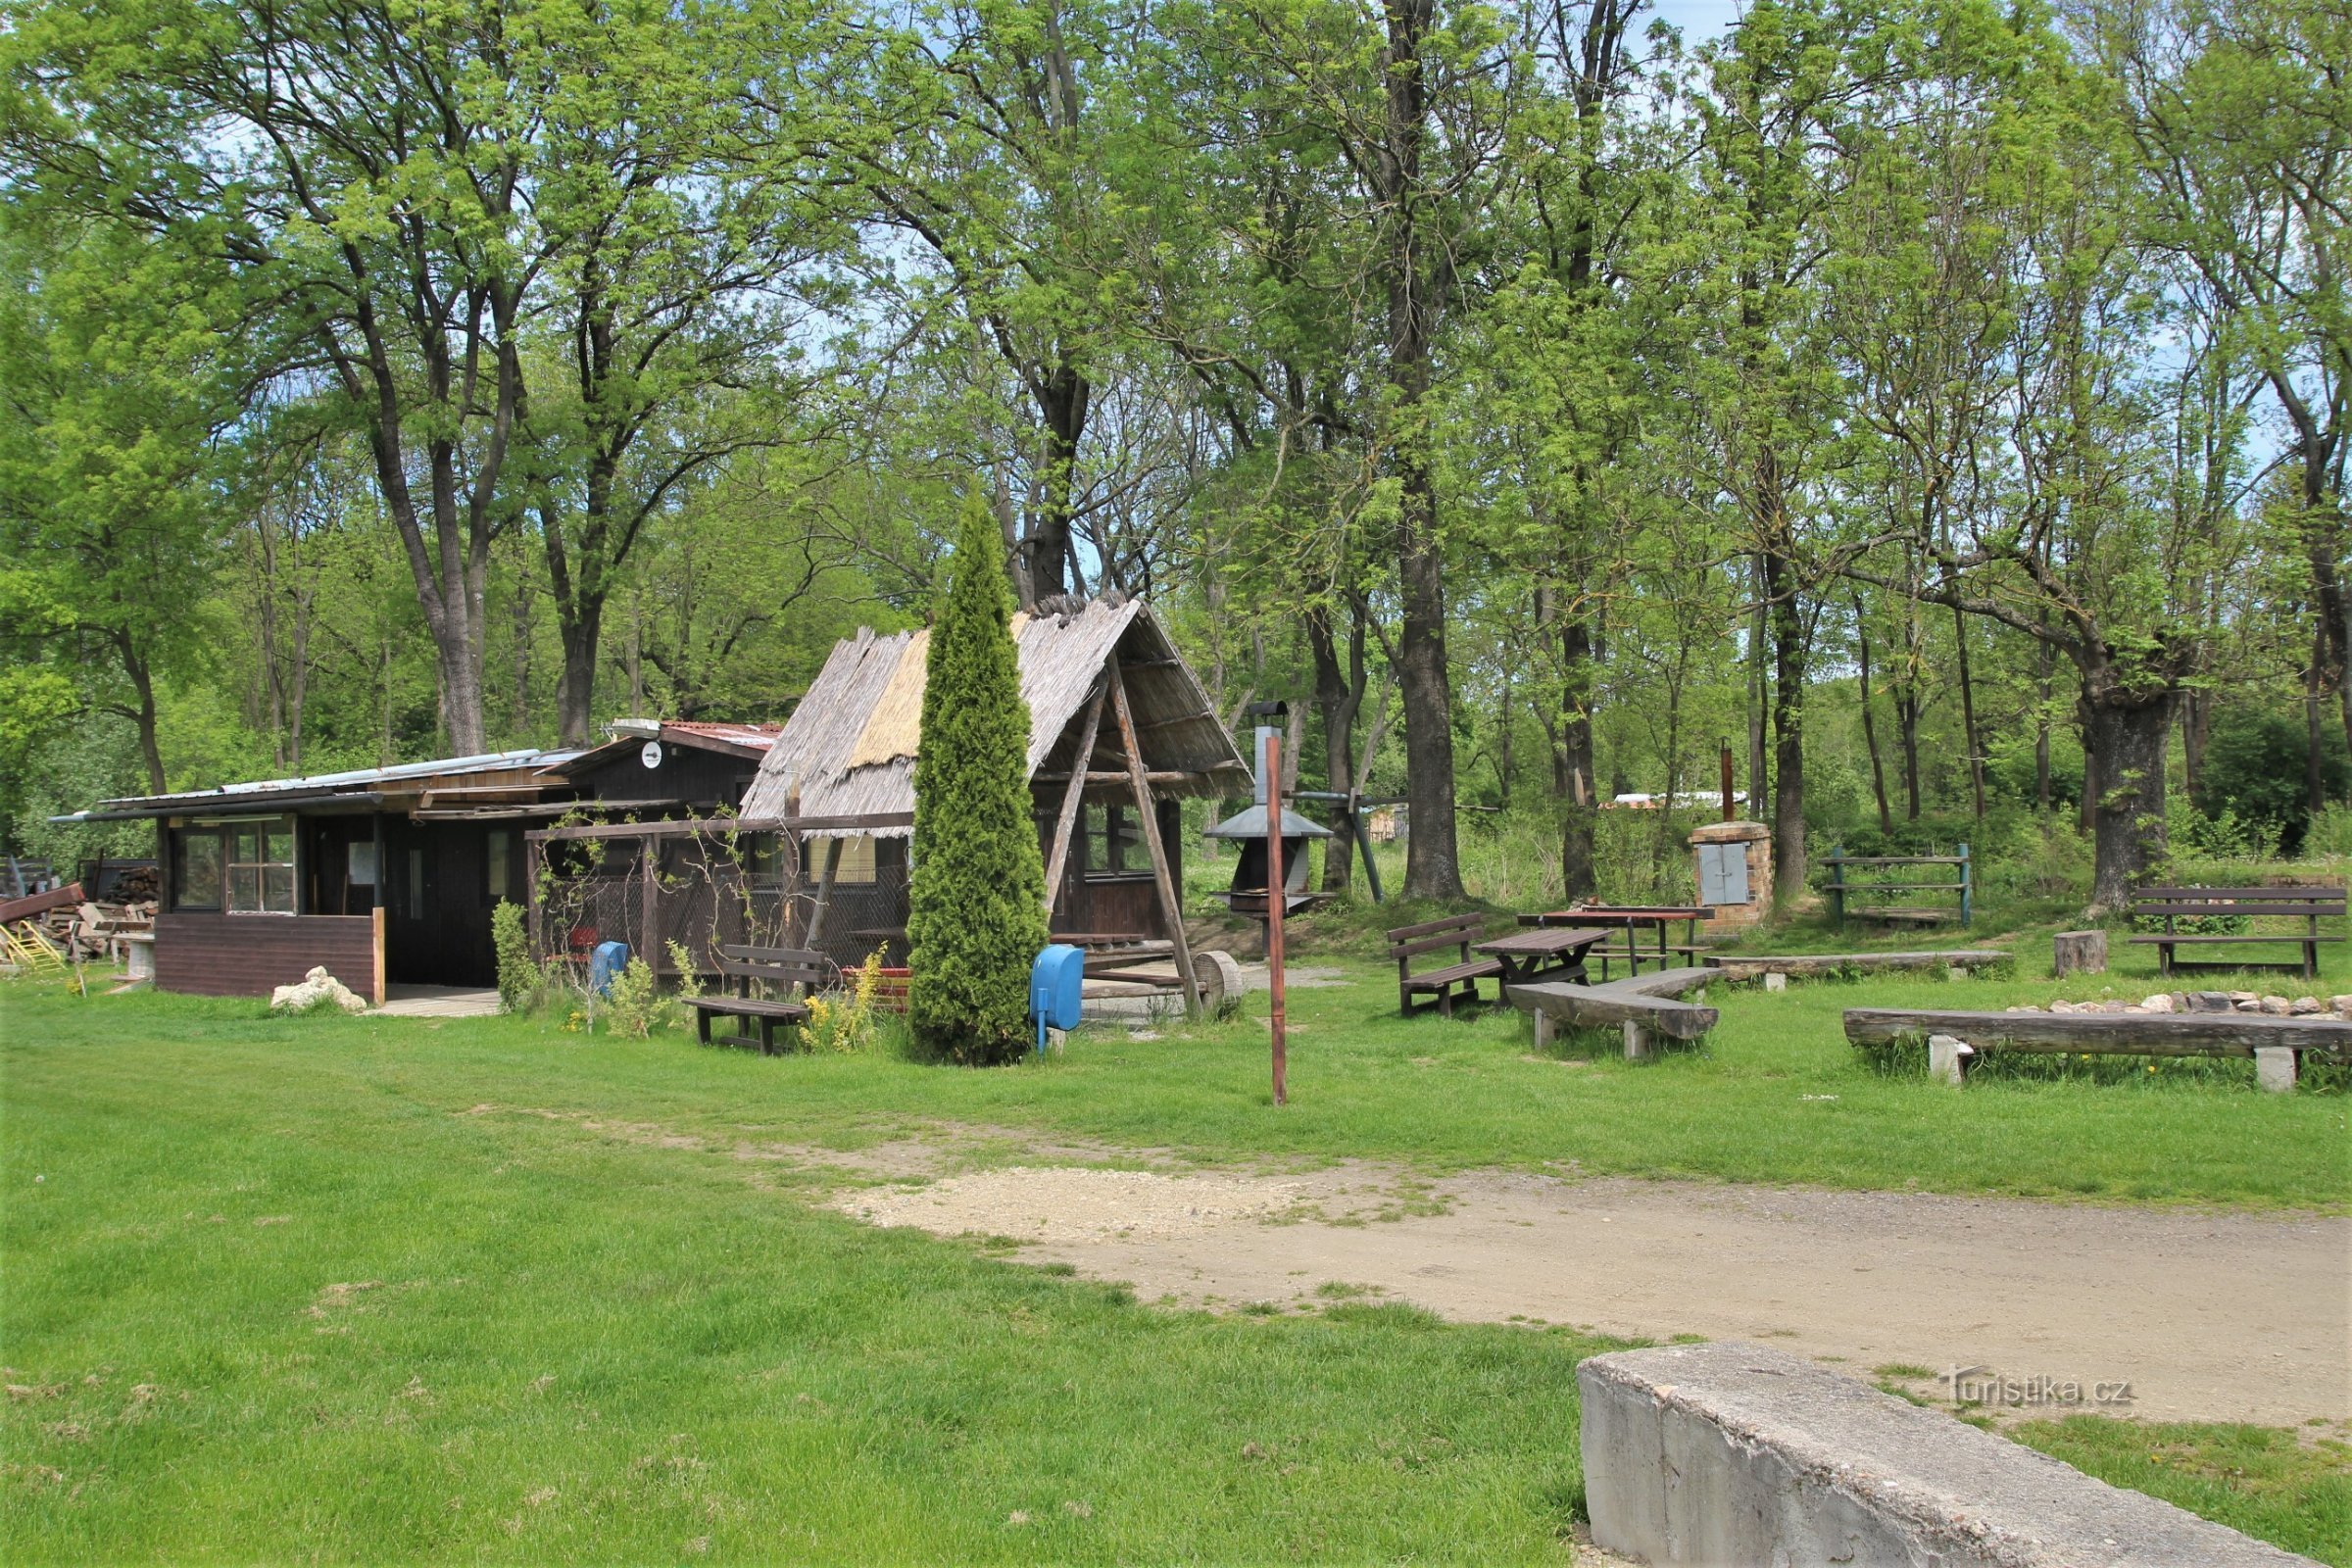 Campsite with fireplace